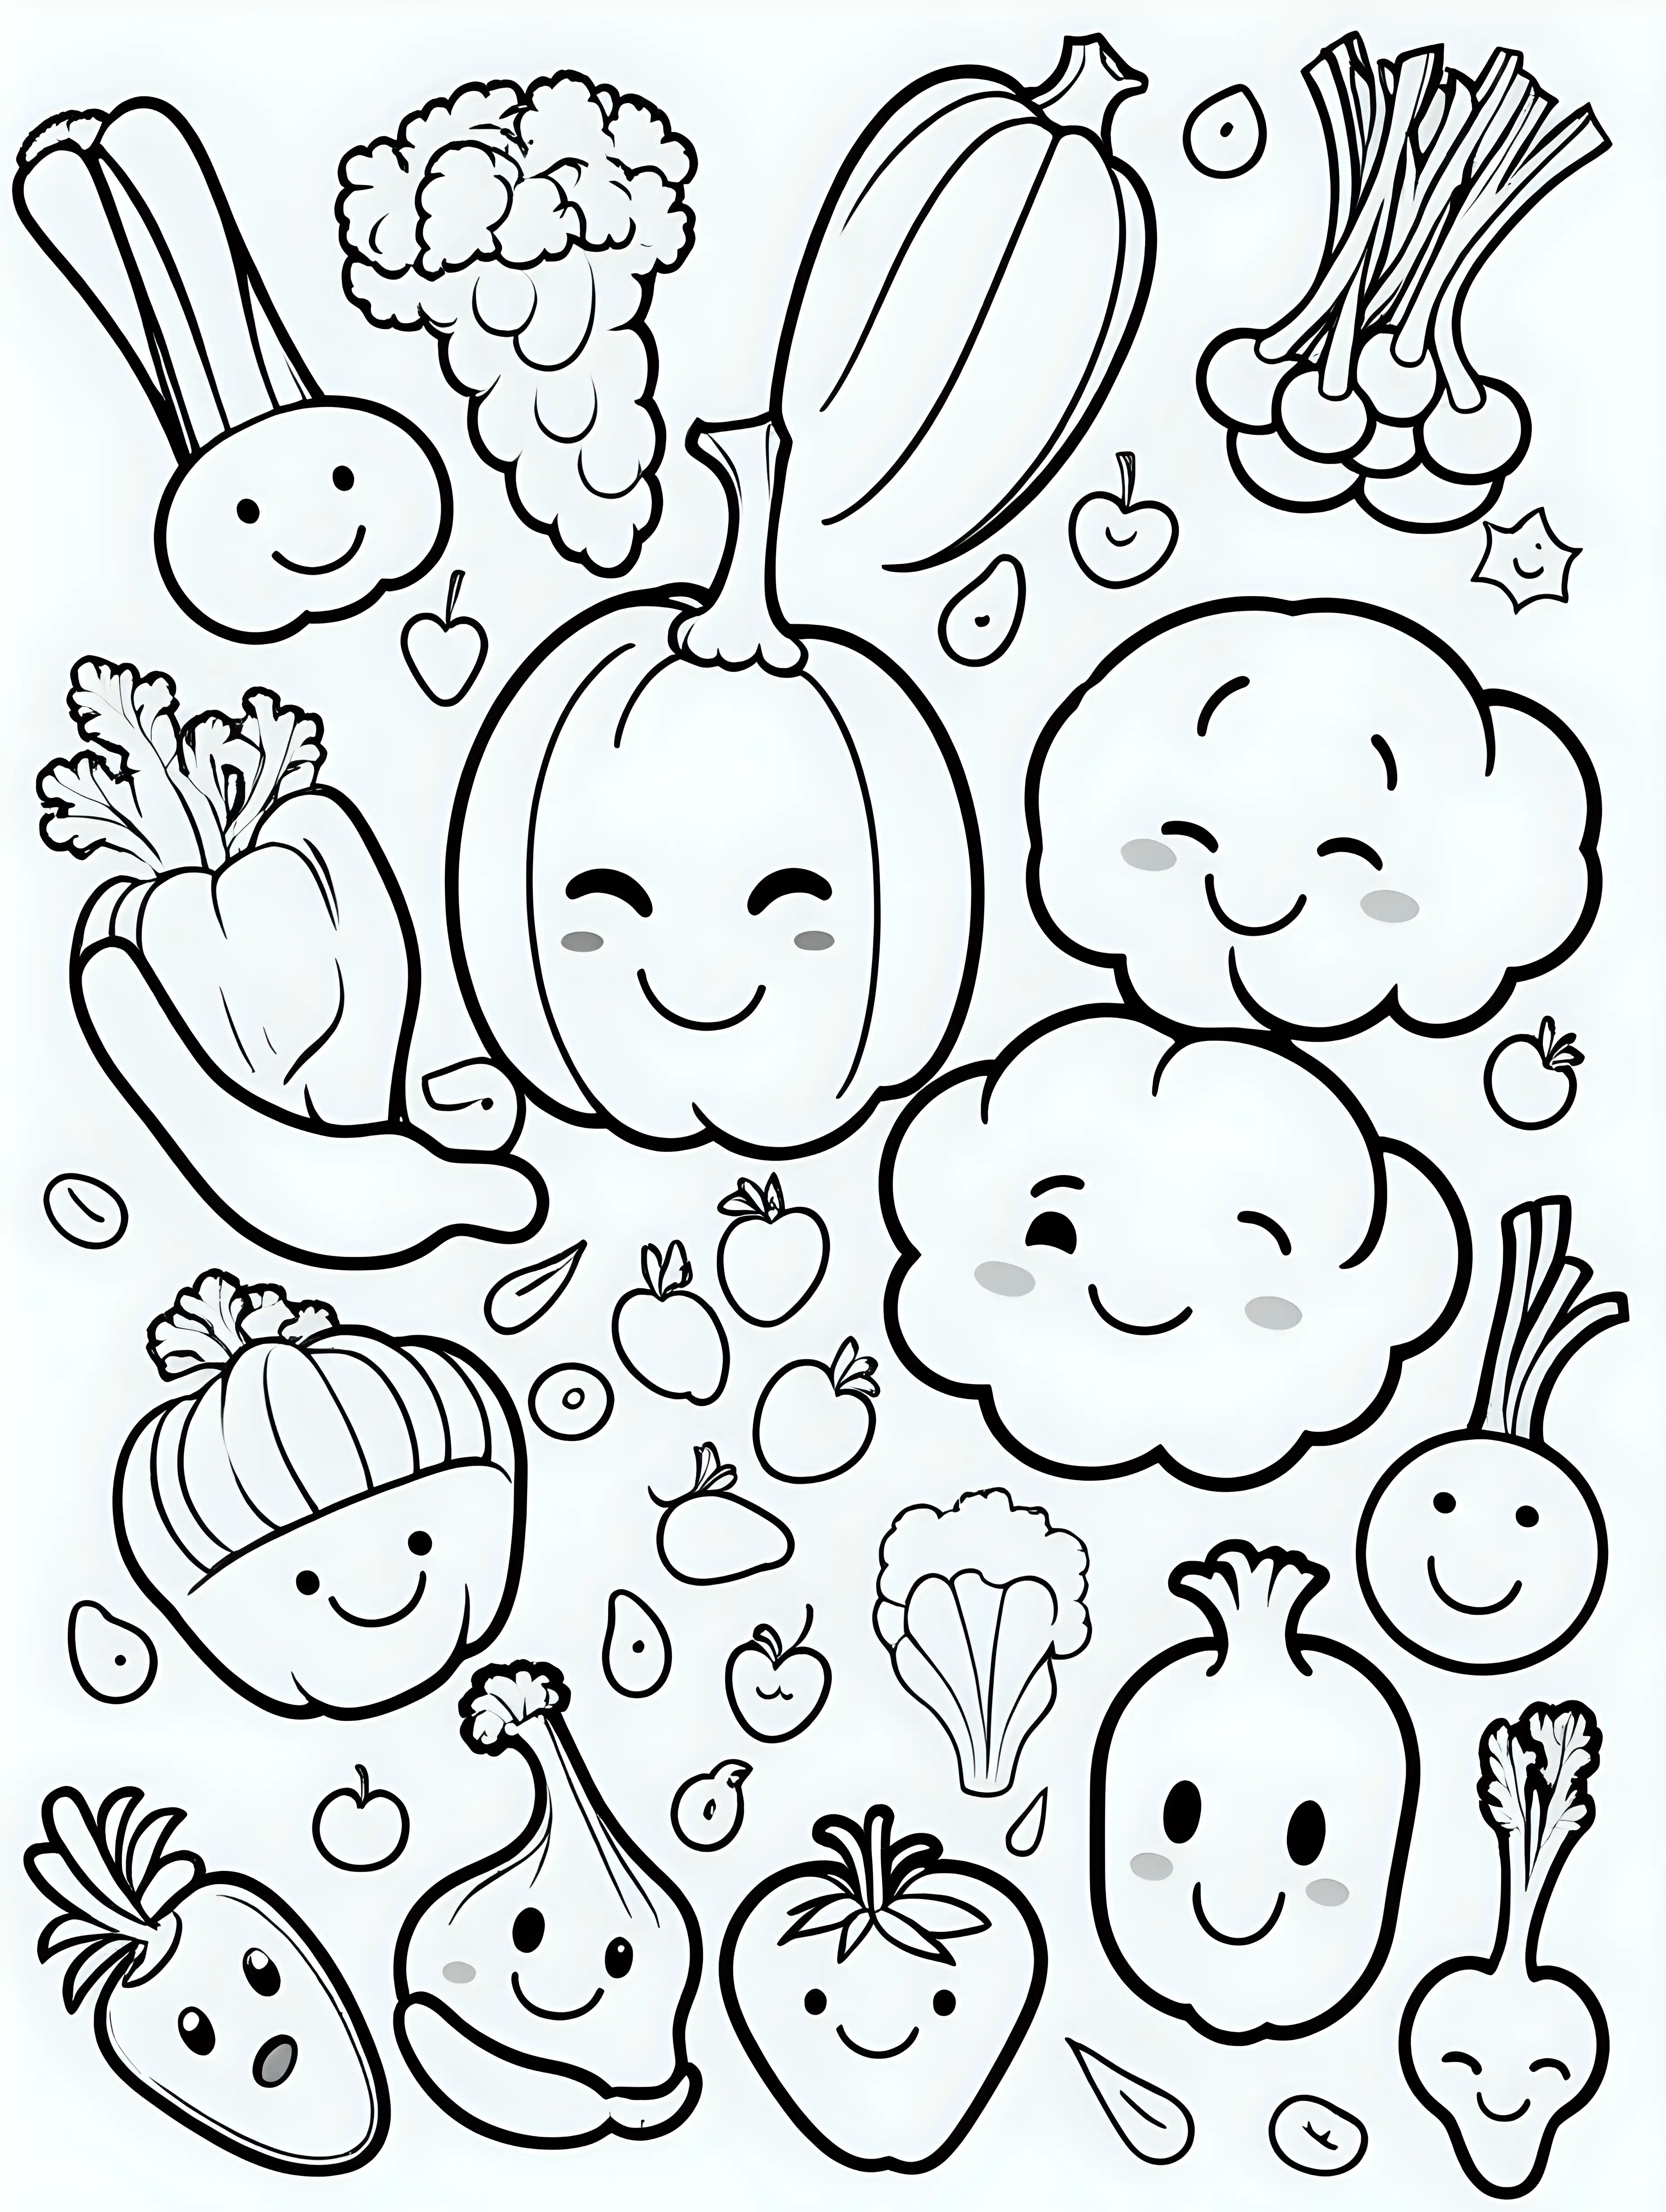 coloring book, cartoon drawing, clean black and white, single line, white background, cute veggies, emojis